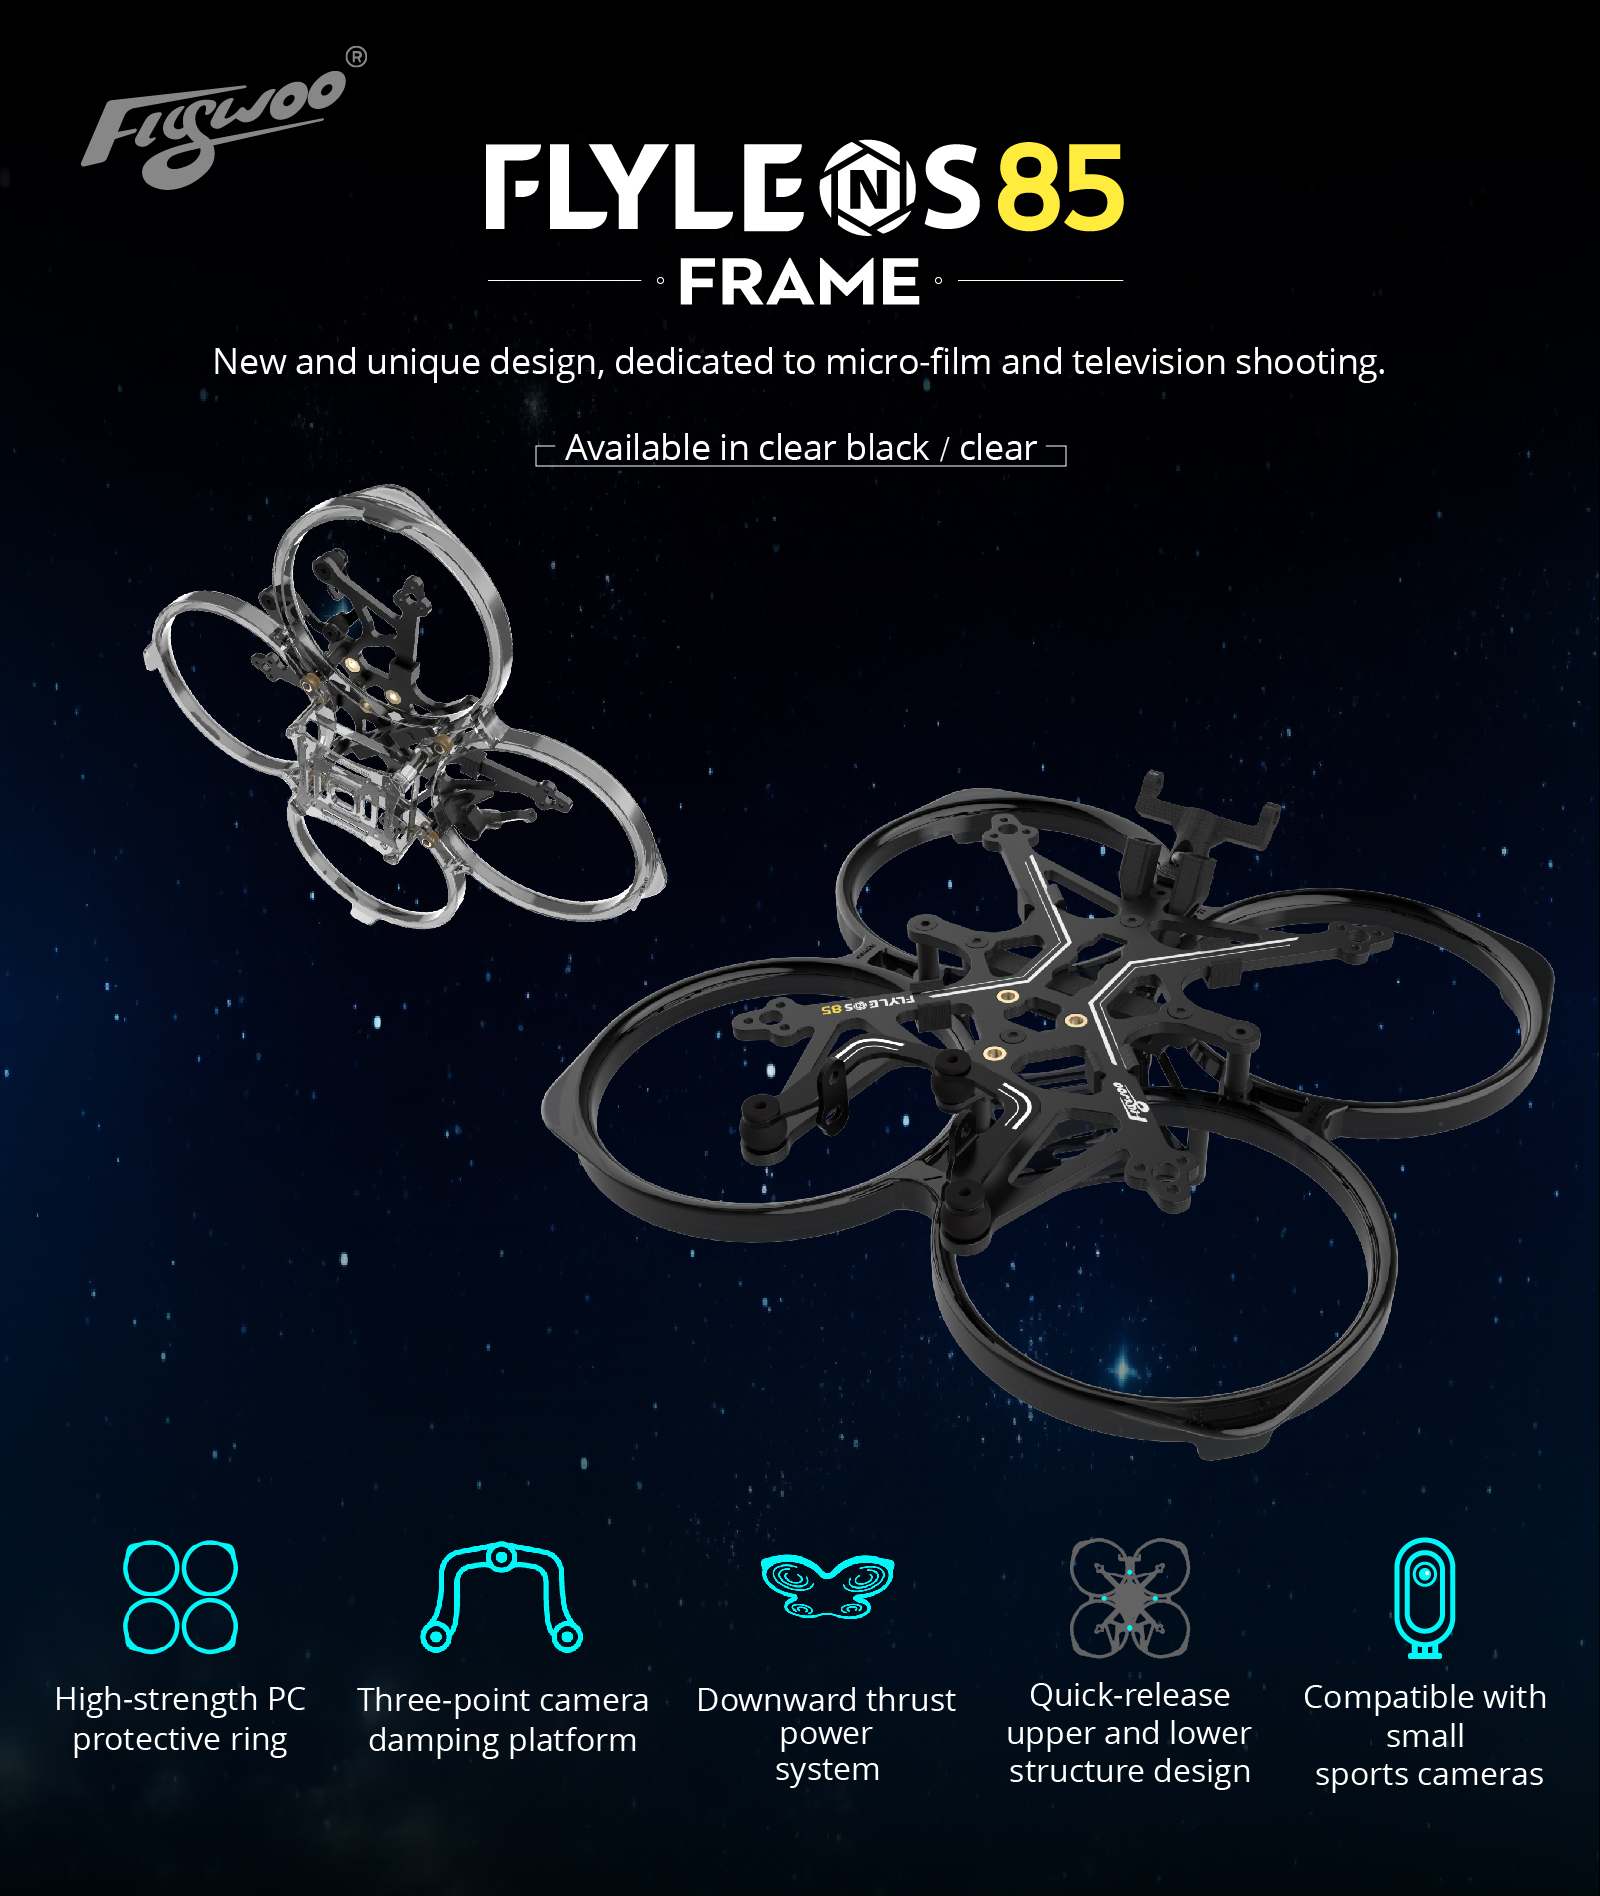 FLYLE@S85 FRAME New and unique design, dedicated to micro-film